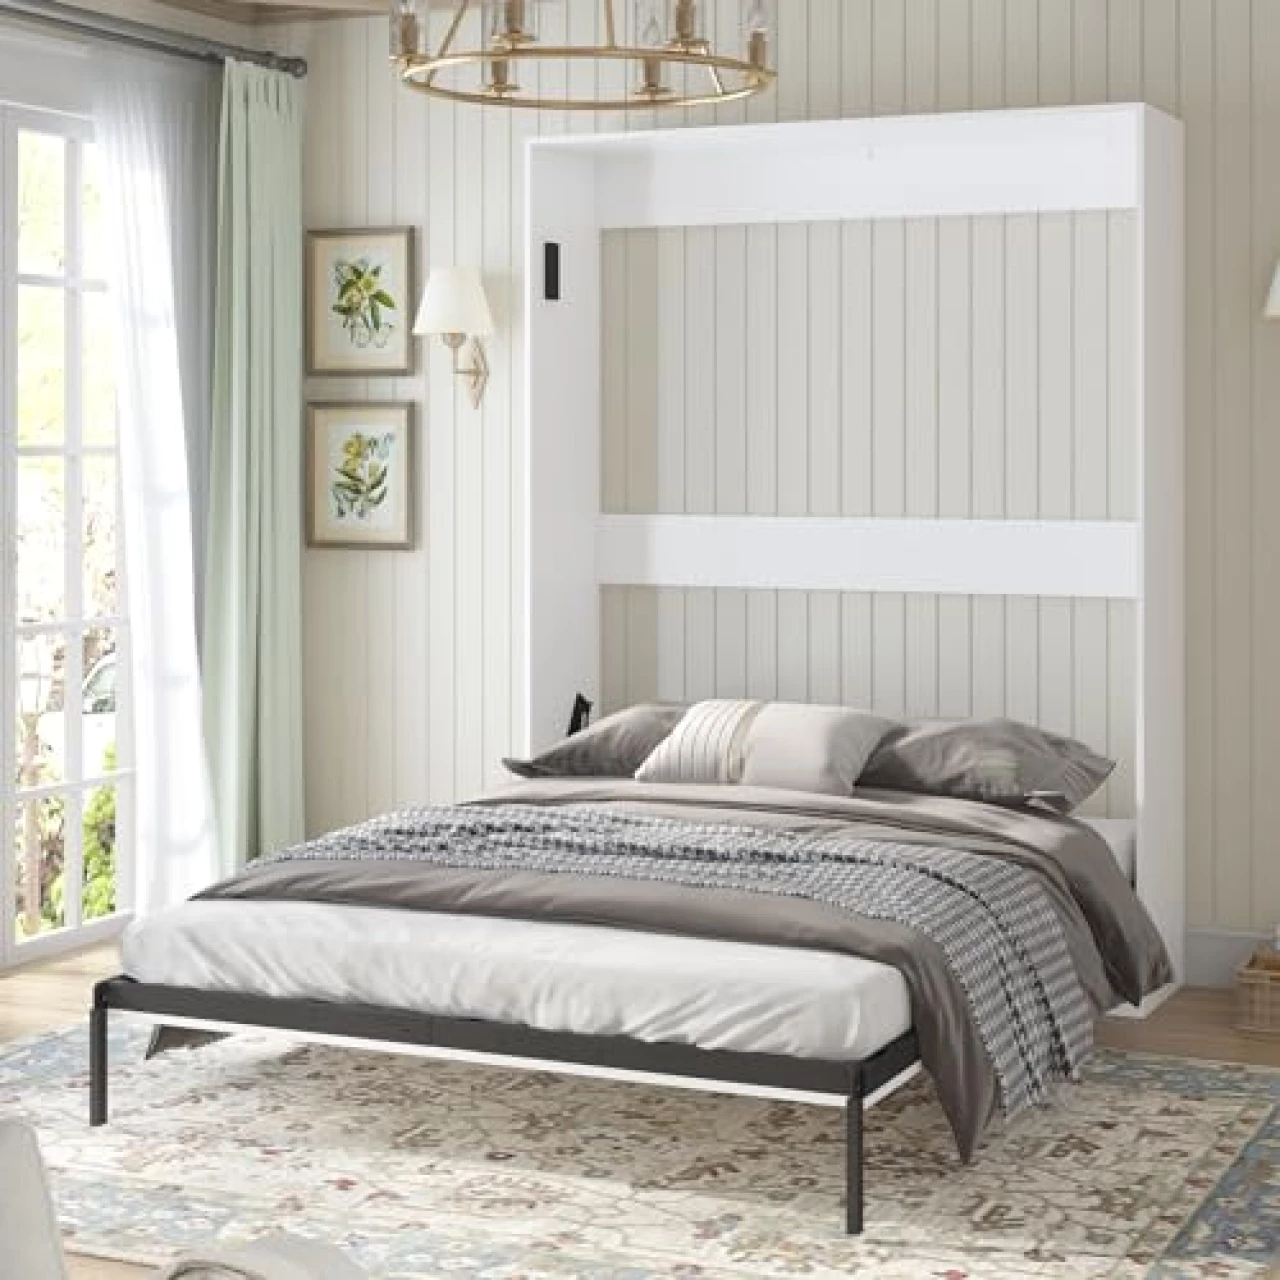 BALUS Murphy Bed Cabinet, Queen Murphy Bed, Guest Room Folding Wallbeds Hidden Bed Wall Unit, Can be Folded into a Cabinet,White